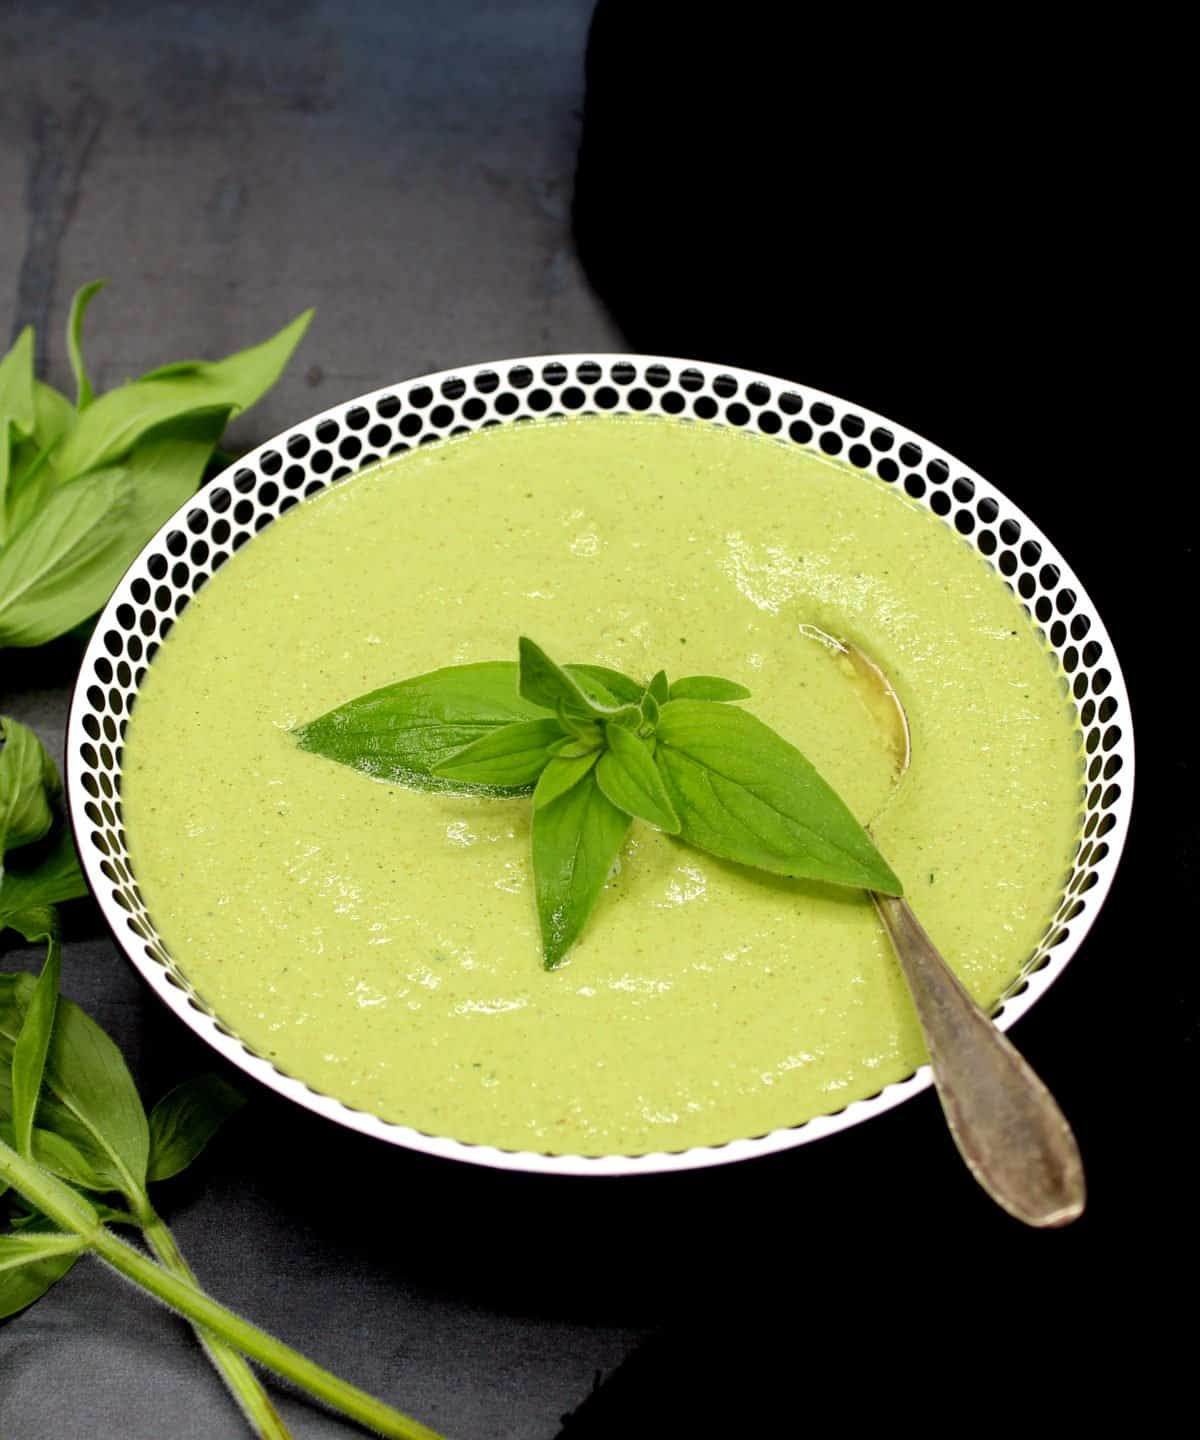 Mint cilantro chutney in a white bowl with black dots with sprigs on mint and a spoon.